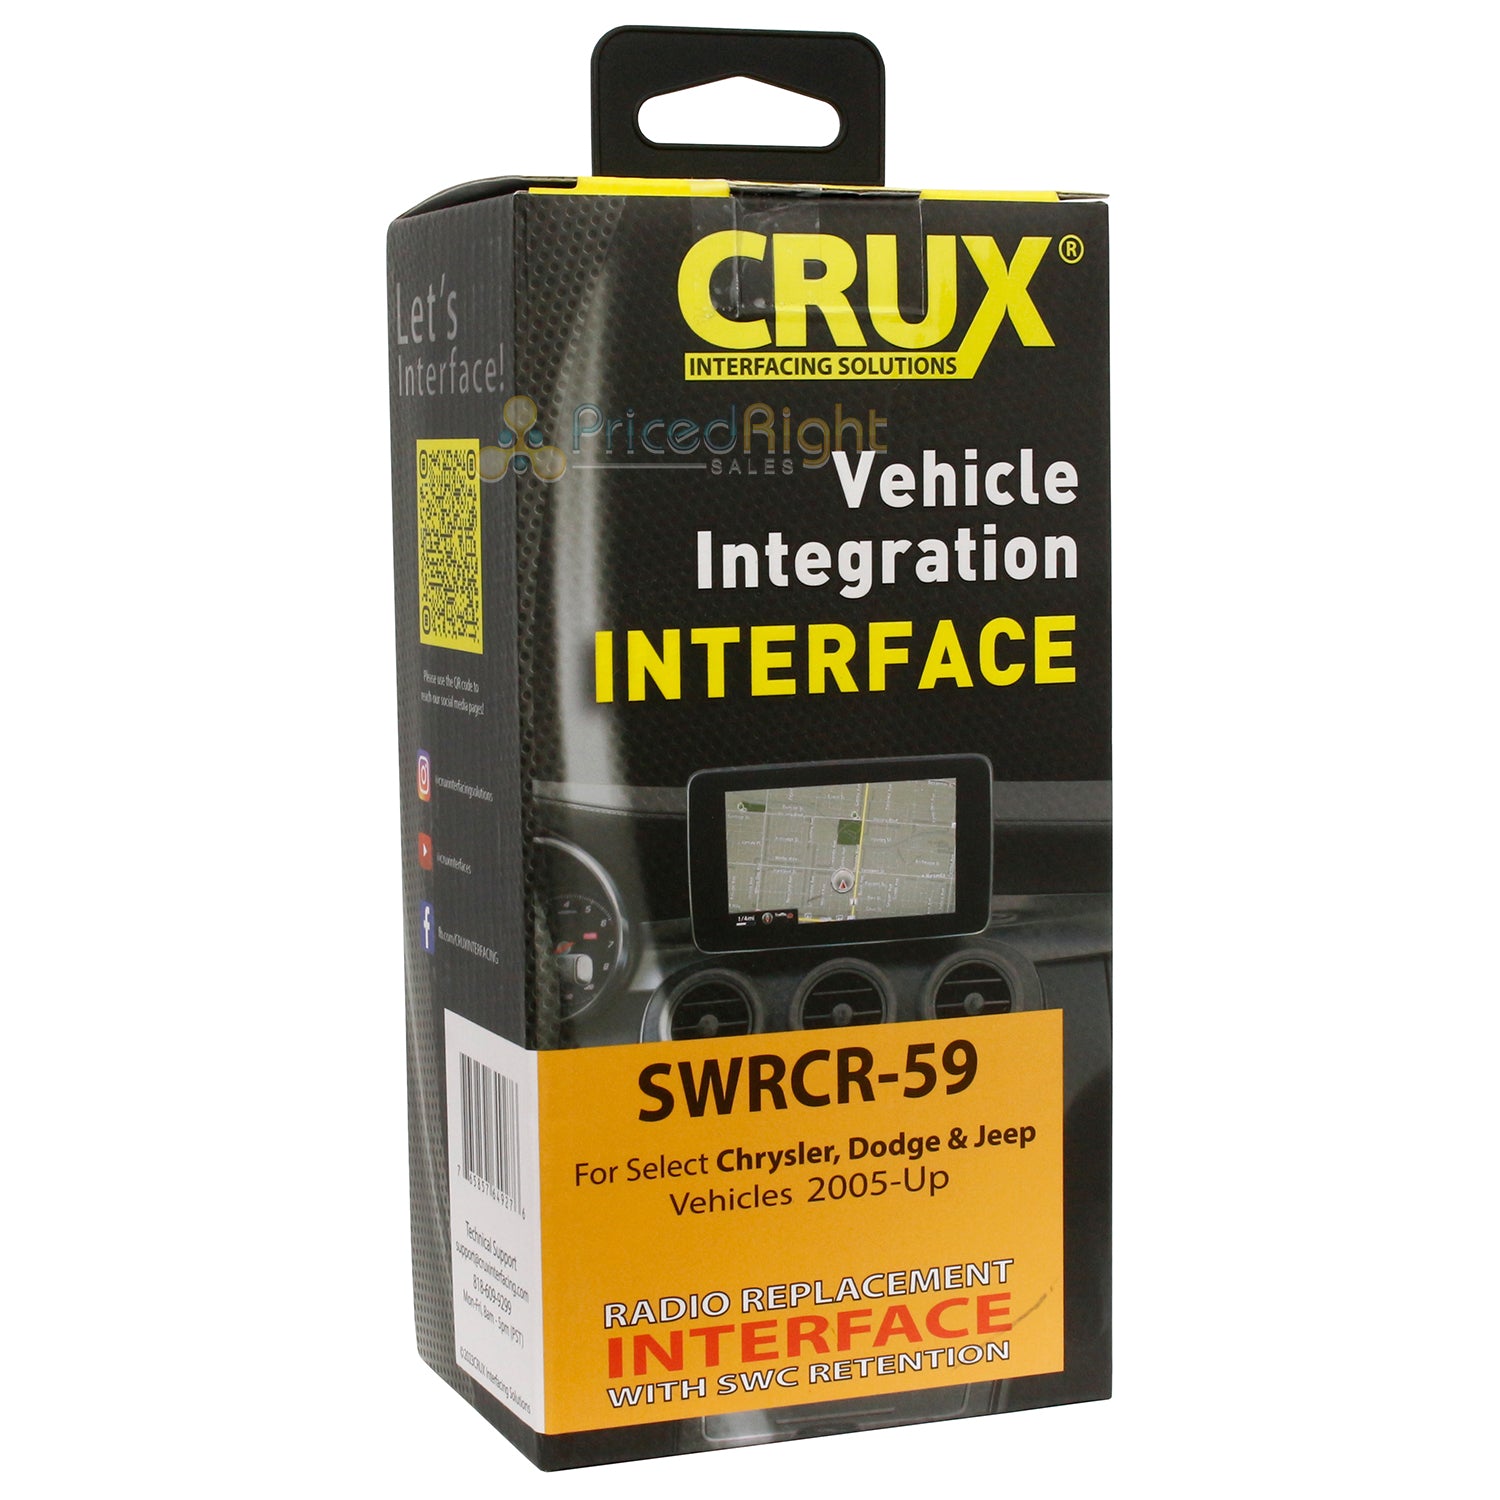 Crux SWRCR-59 Radio Replacement Interface For Select 2004-Up Chrysler Dodge Jeep